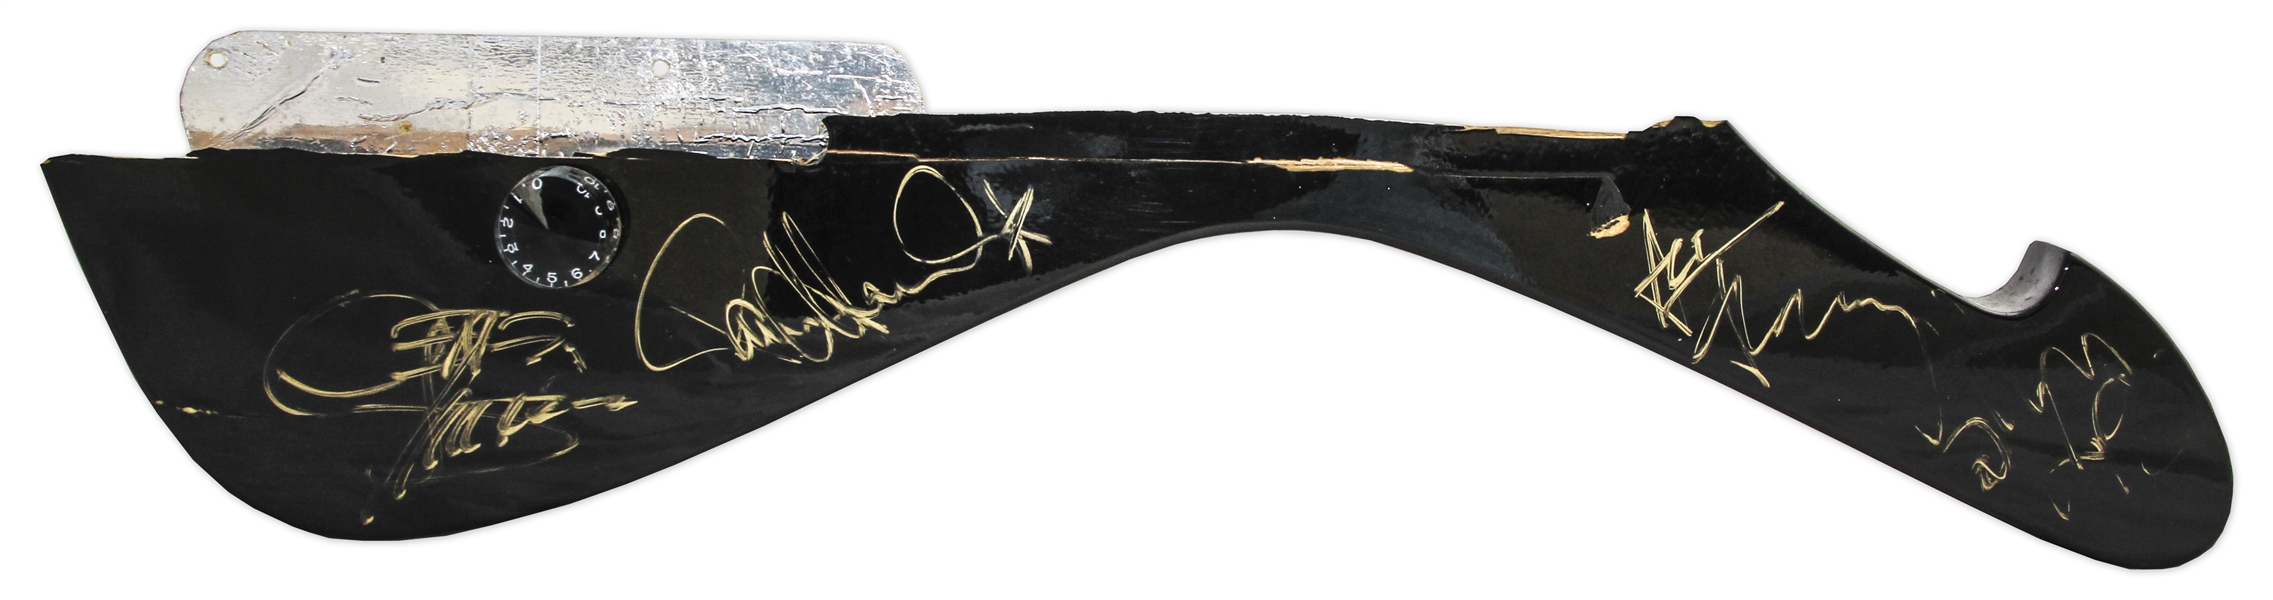 KISS Concert-Used Guitar Piece Signed by All Four Original Members -- Also With Gene Simmons Costume Stud